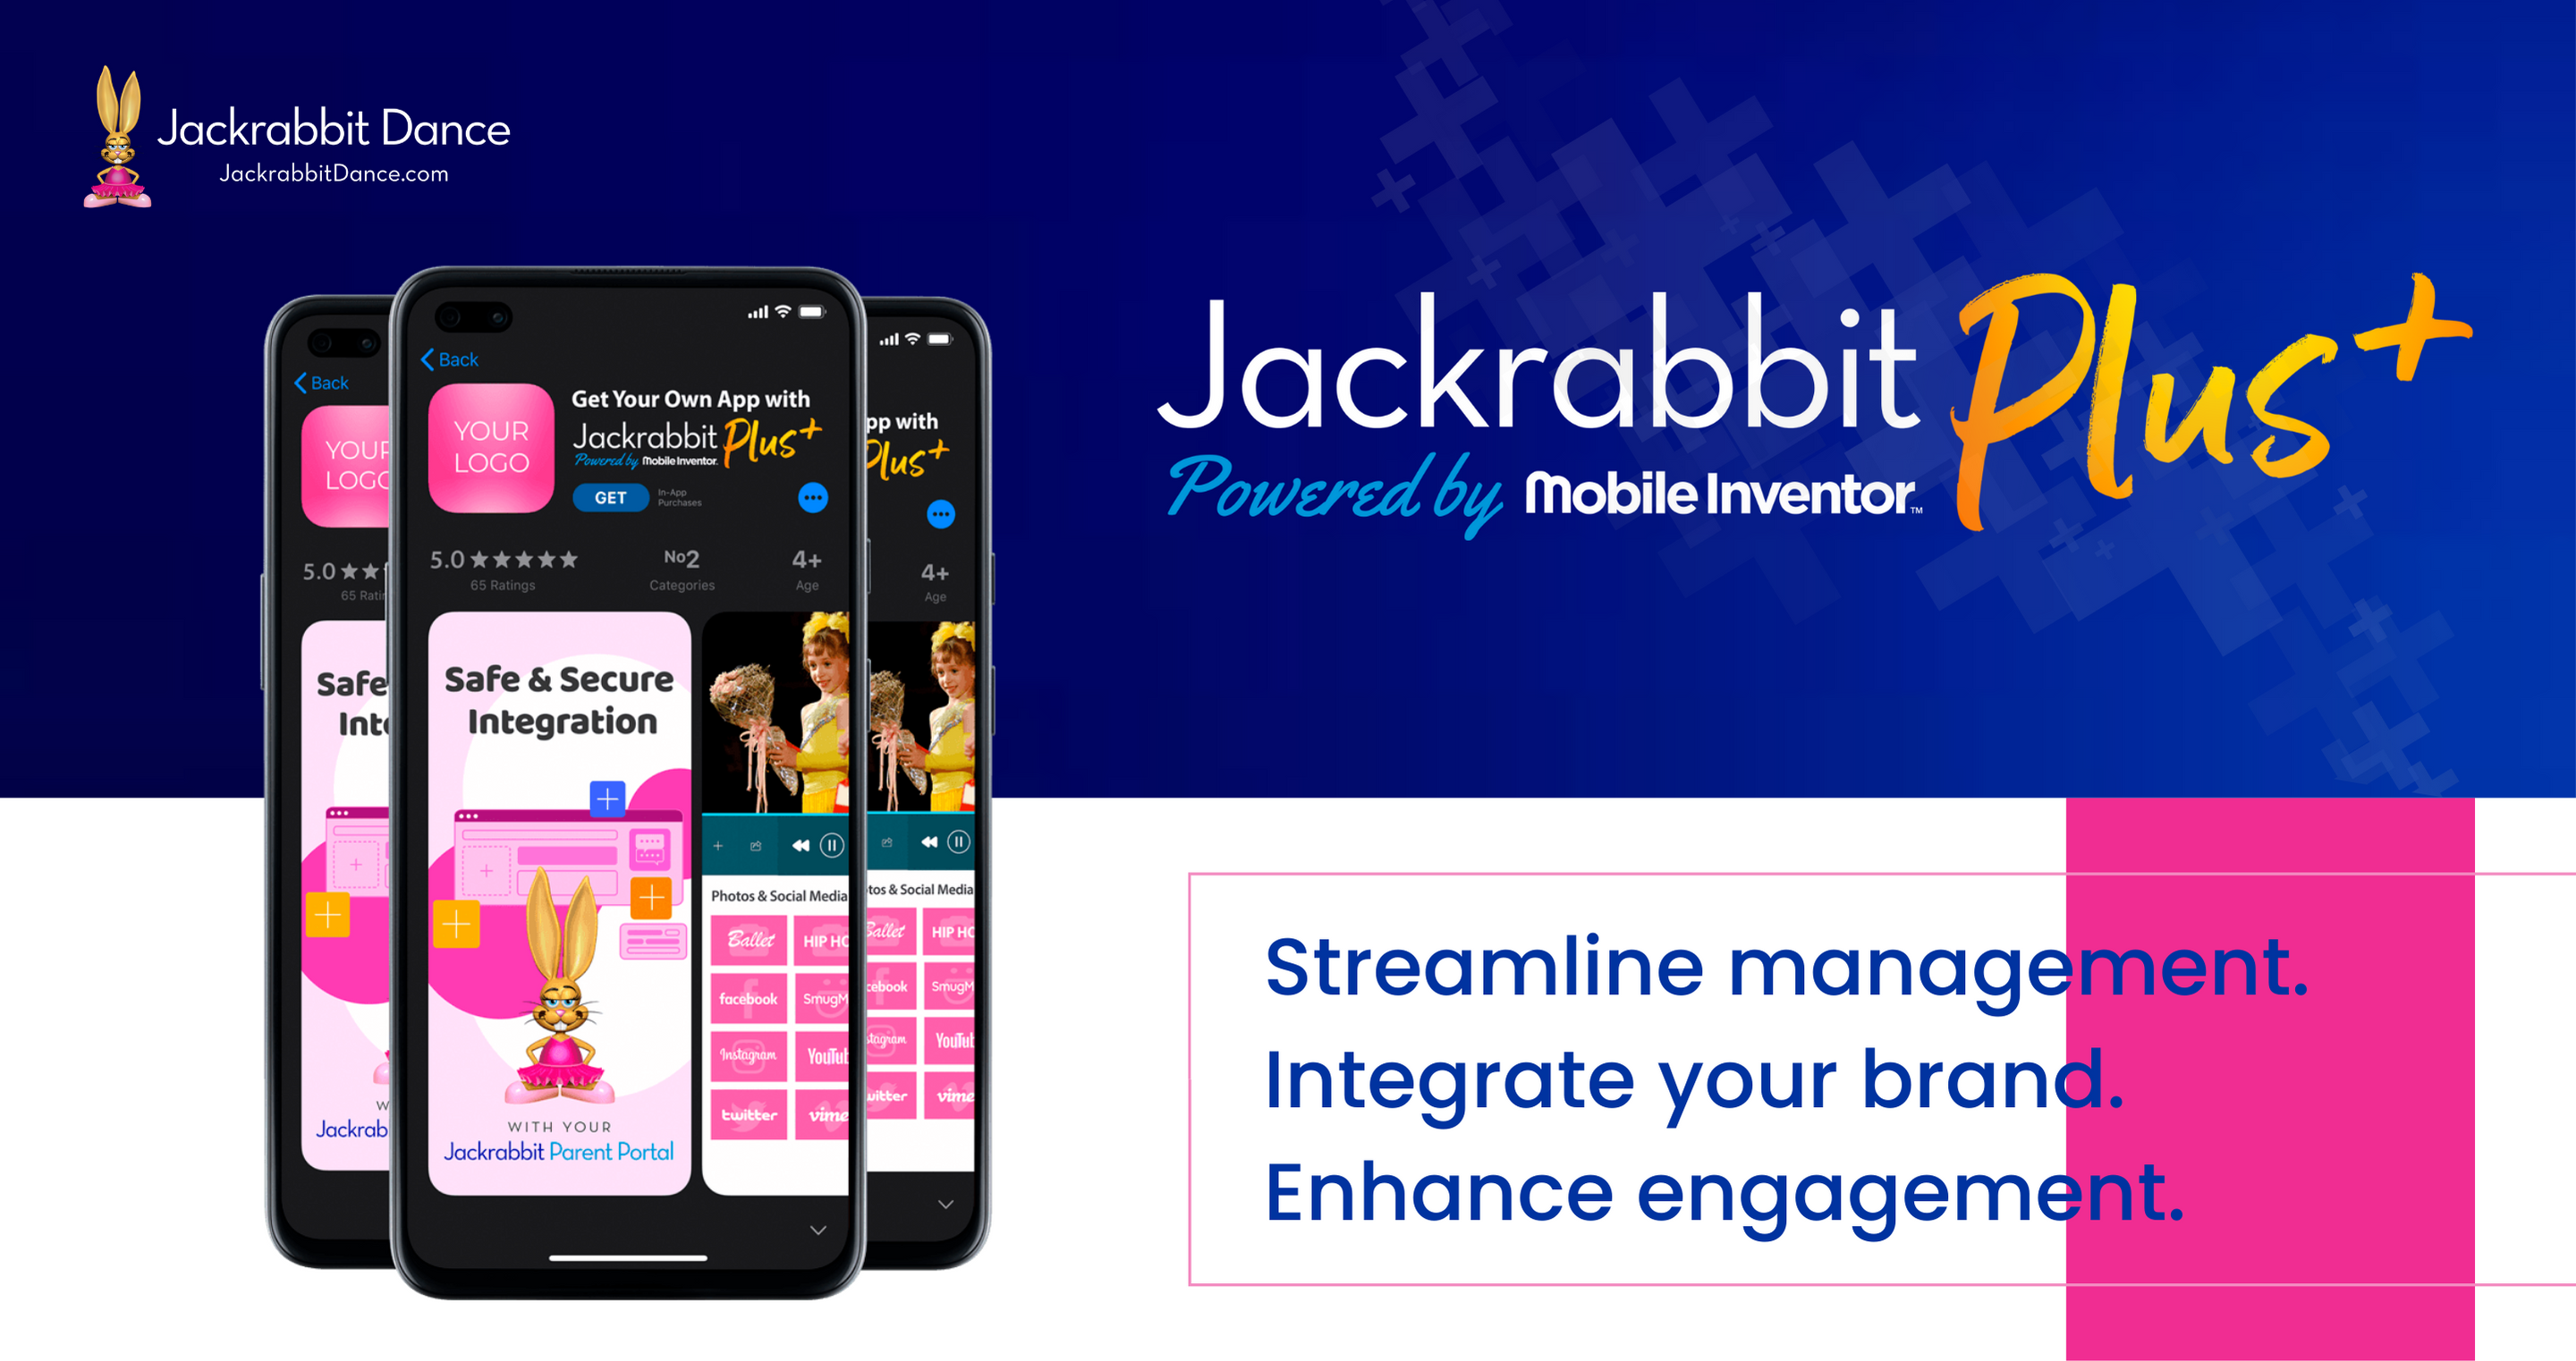 Upgrade your parent experience with Jackrabbit Plus! You'll get a customized, branded app just for your dance studio. 